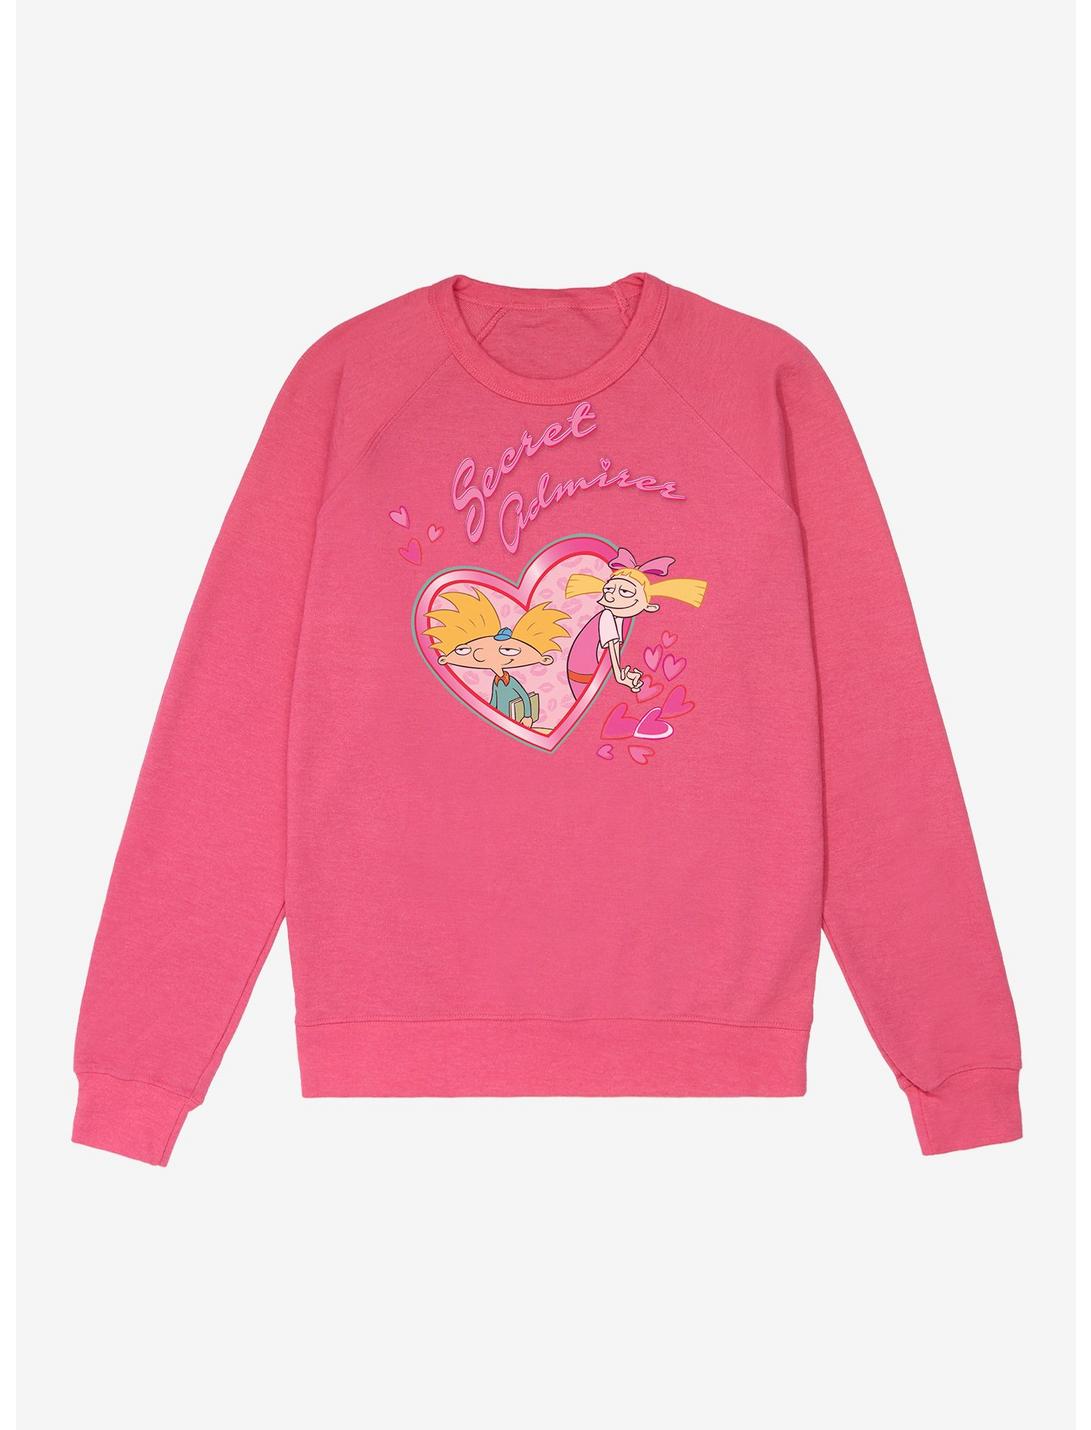 Hey Arnold! Secret Admirer French Terry Sweatshirt, HELICONIA HEATHER, hi-res